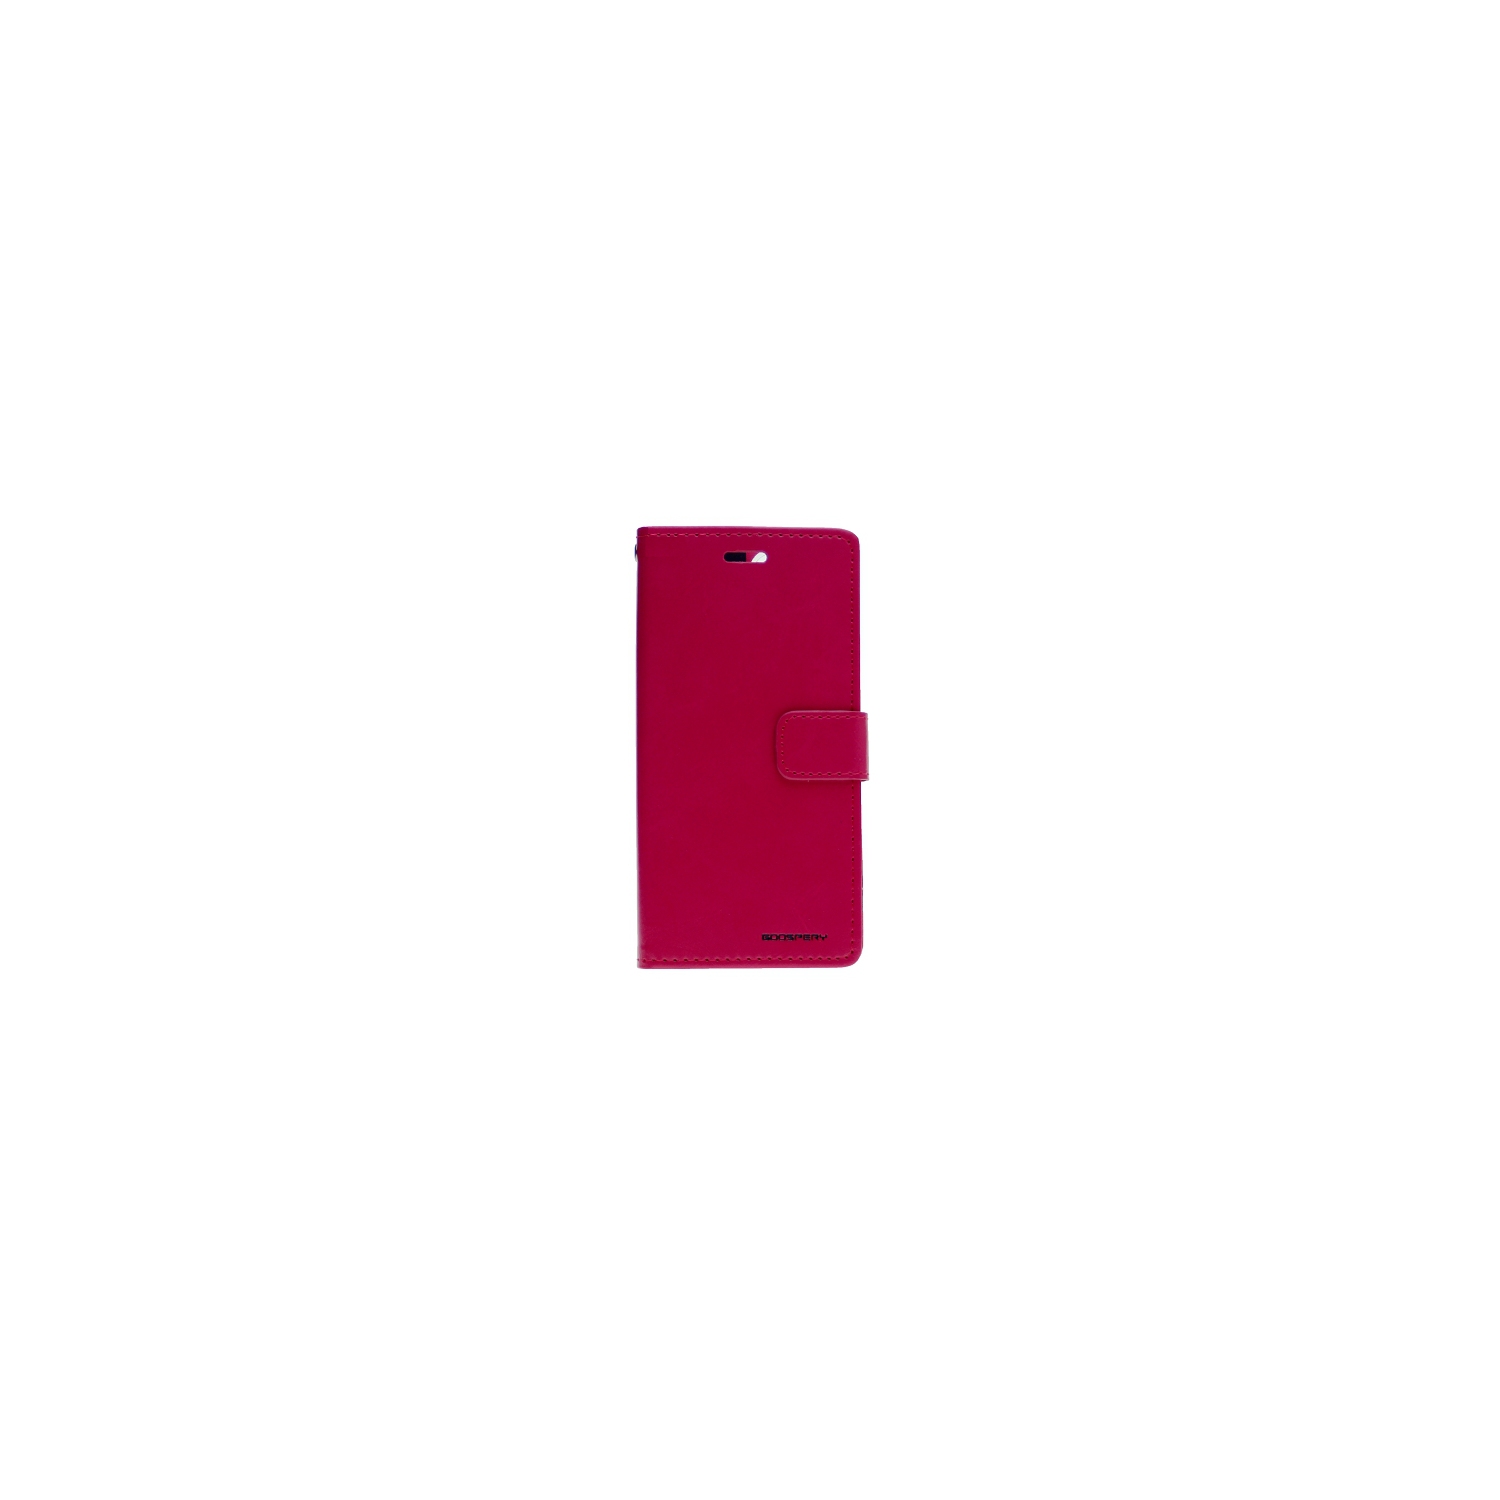 TopSave Goospery Bluemoon Card Slot w/Magnetic Clip Leather Folio Wallet Flip For iPhone 13 Pro Max (6.7), Hot Pink